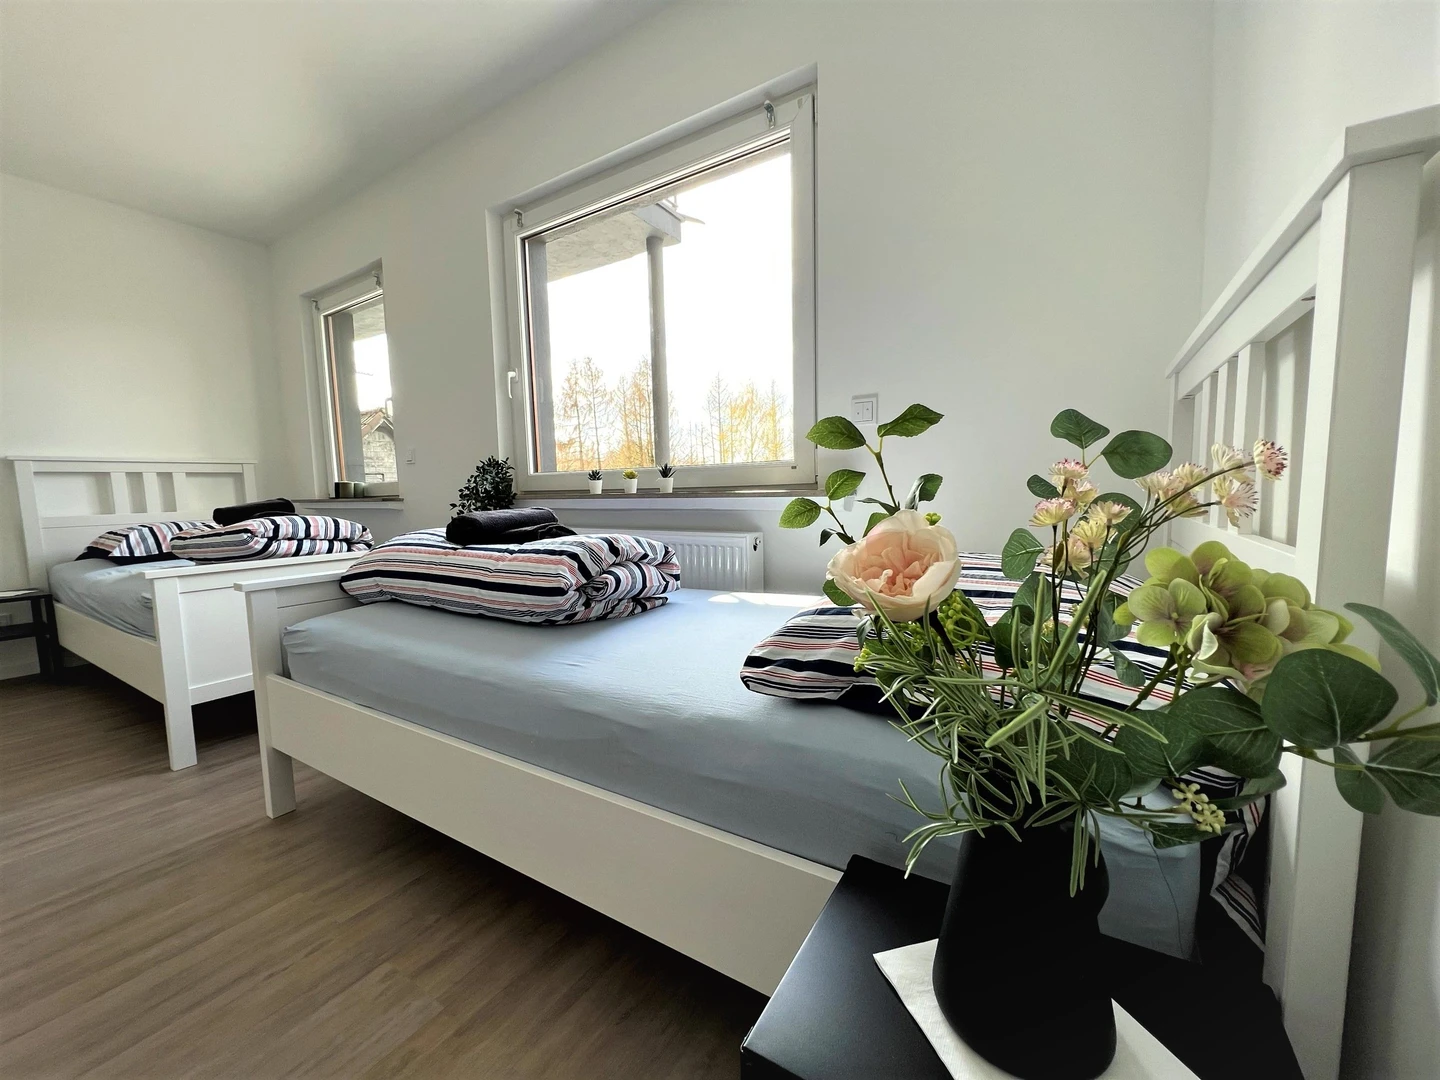 Renting rooms by the month in Bergisch Gladbach